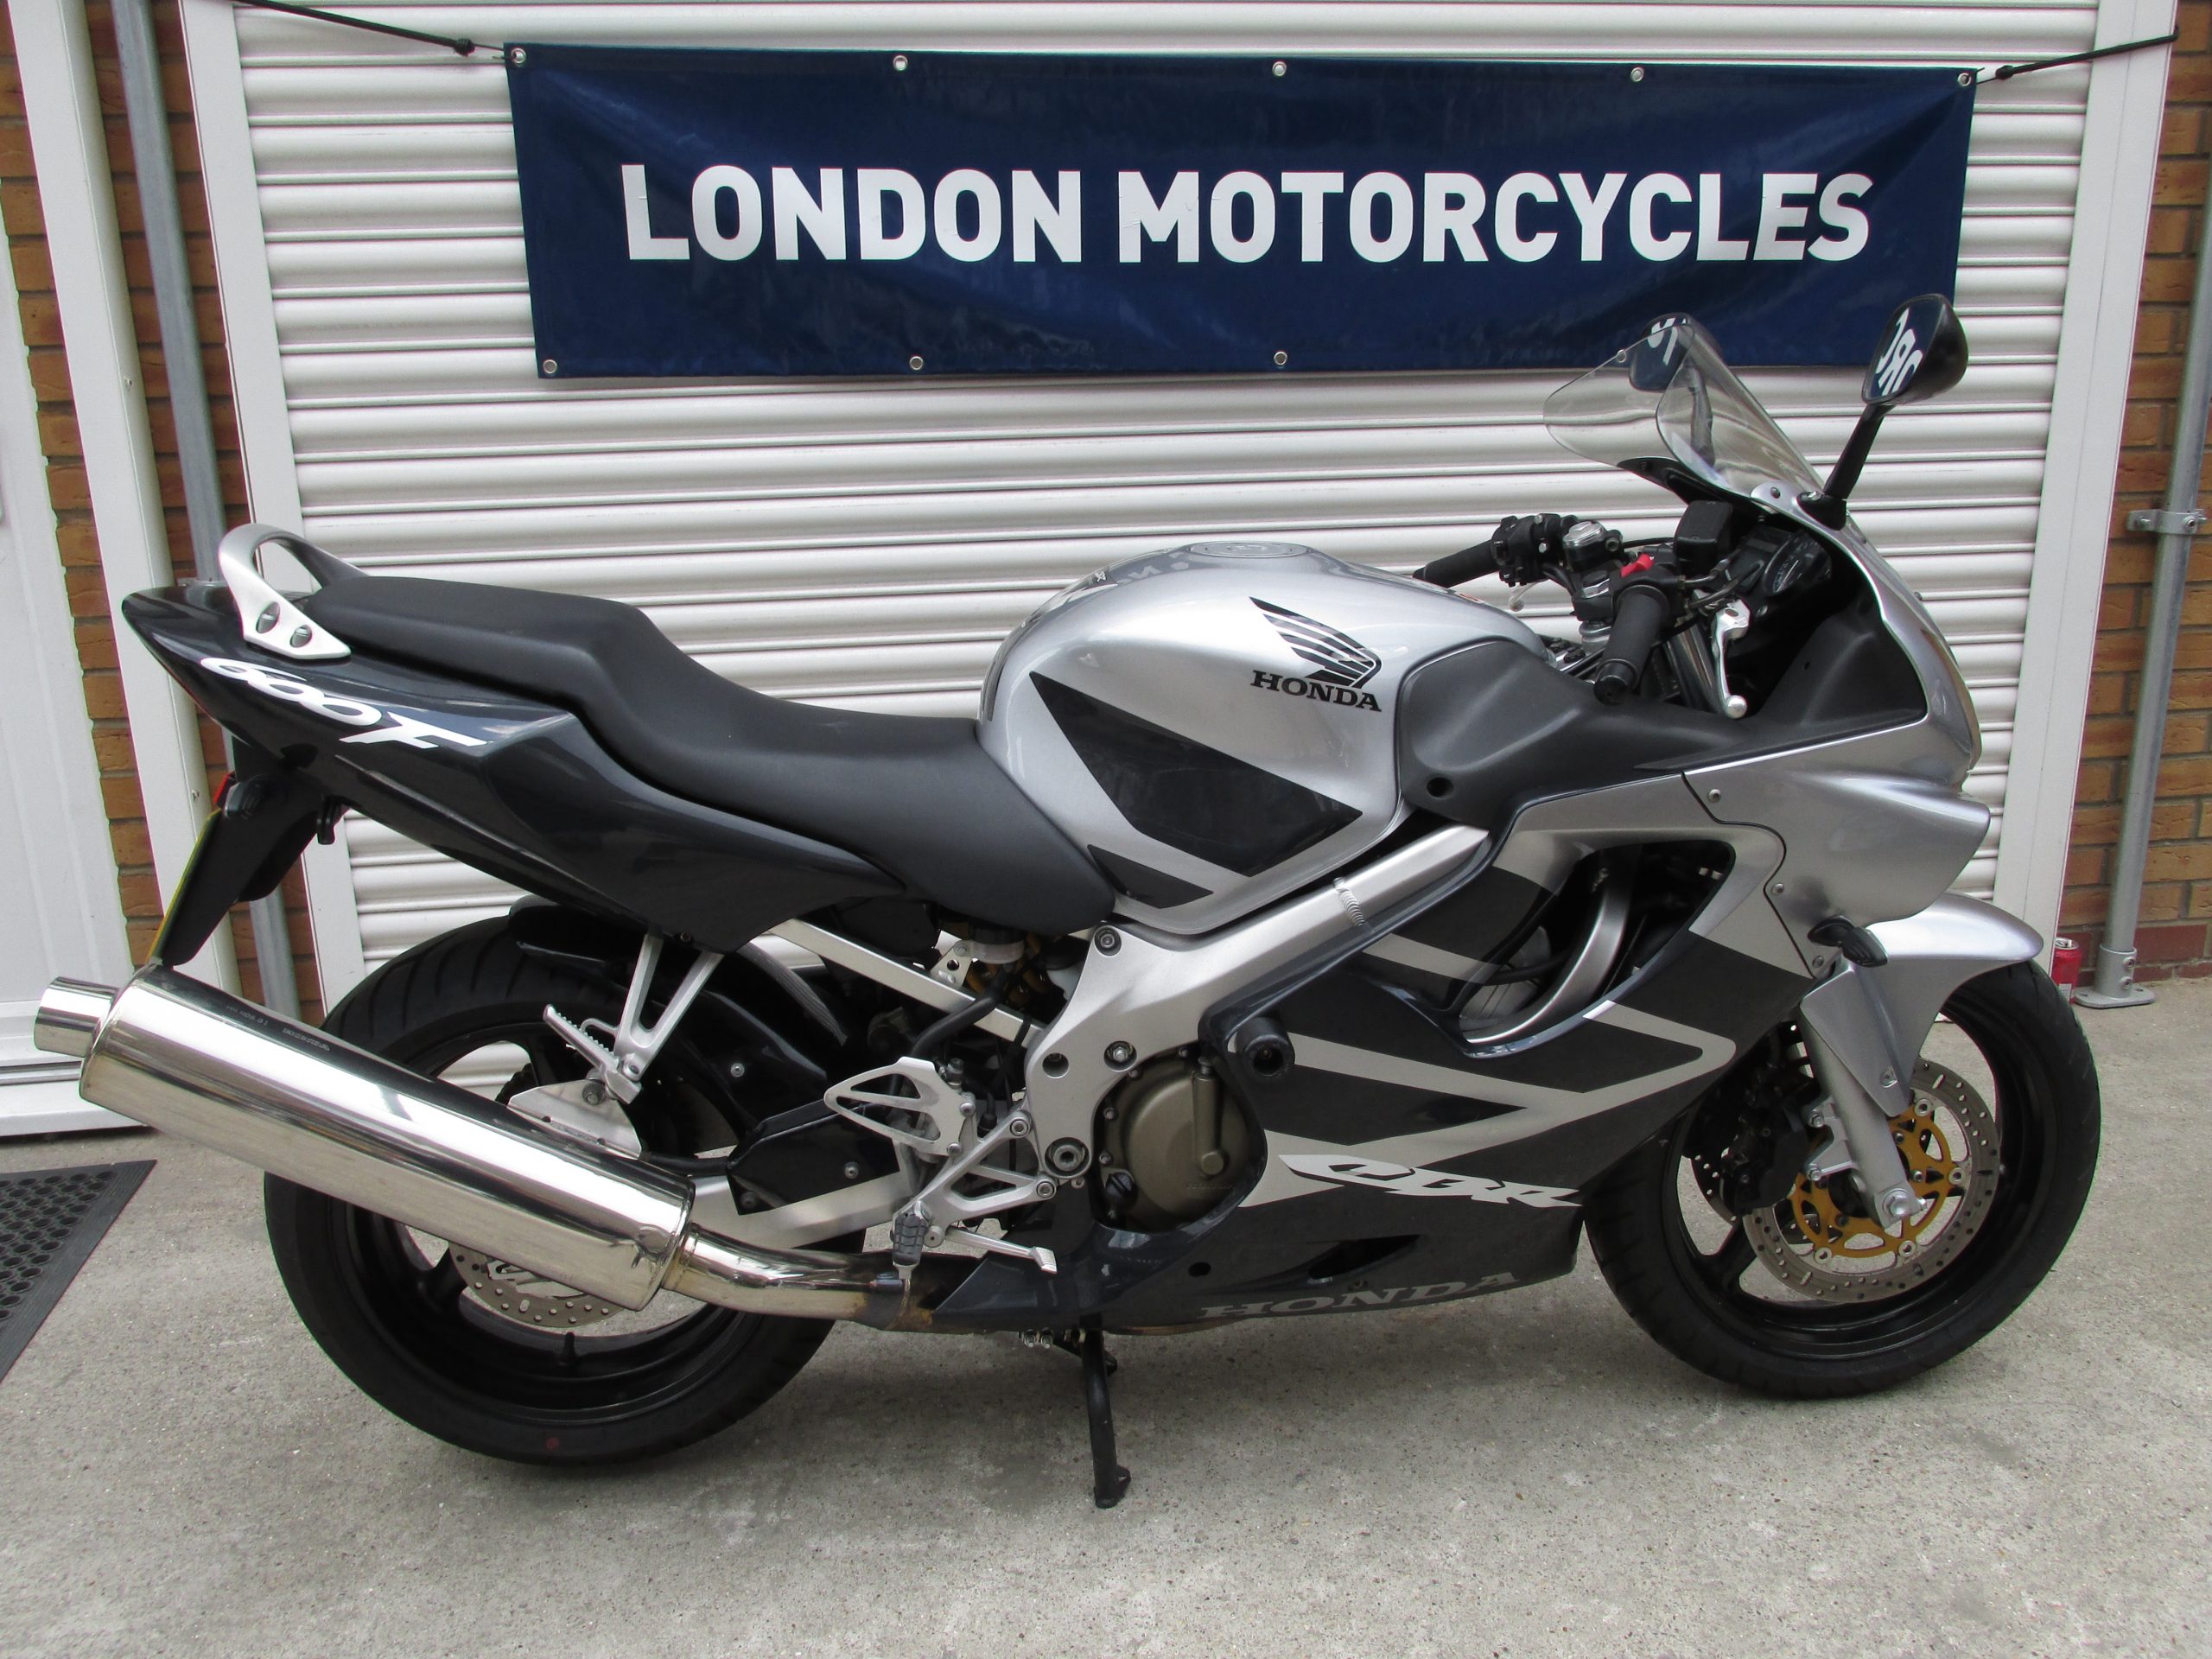 Honda CBR 600 F 2006 23k Miles for Sale in Hammermith | London Motorcycles